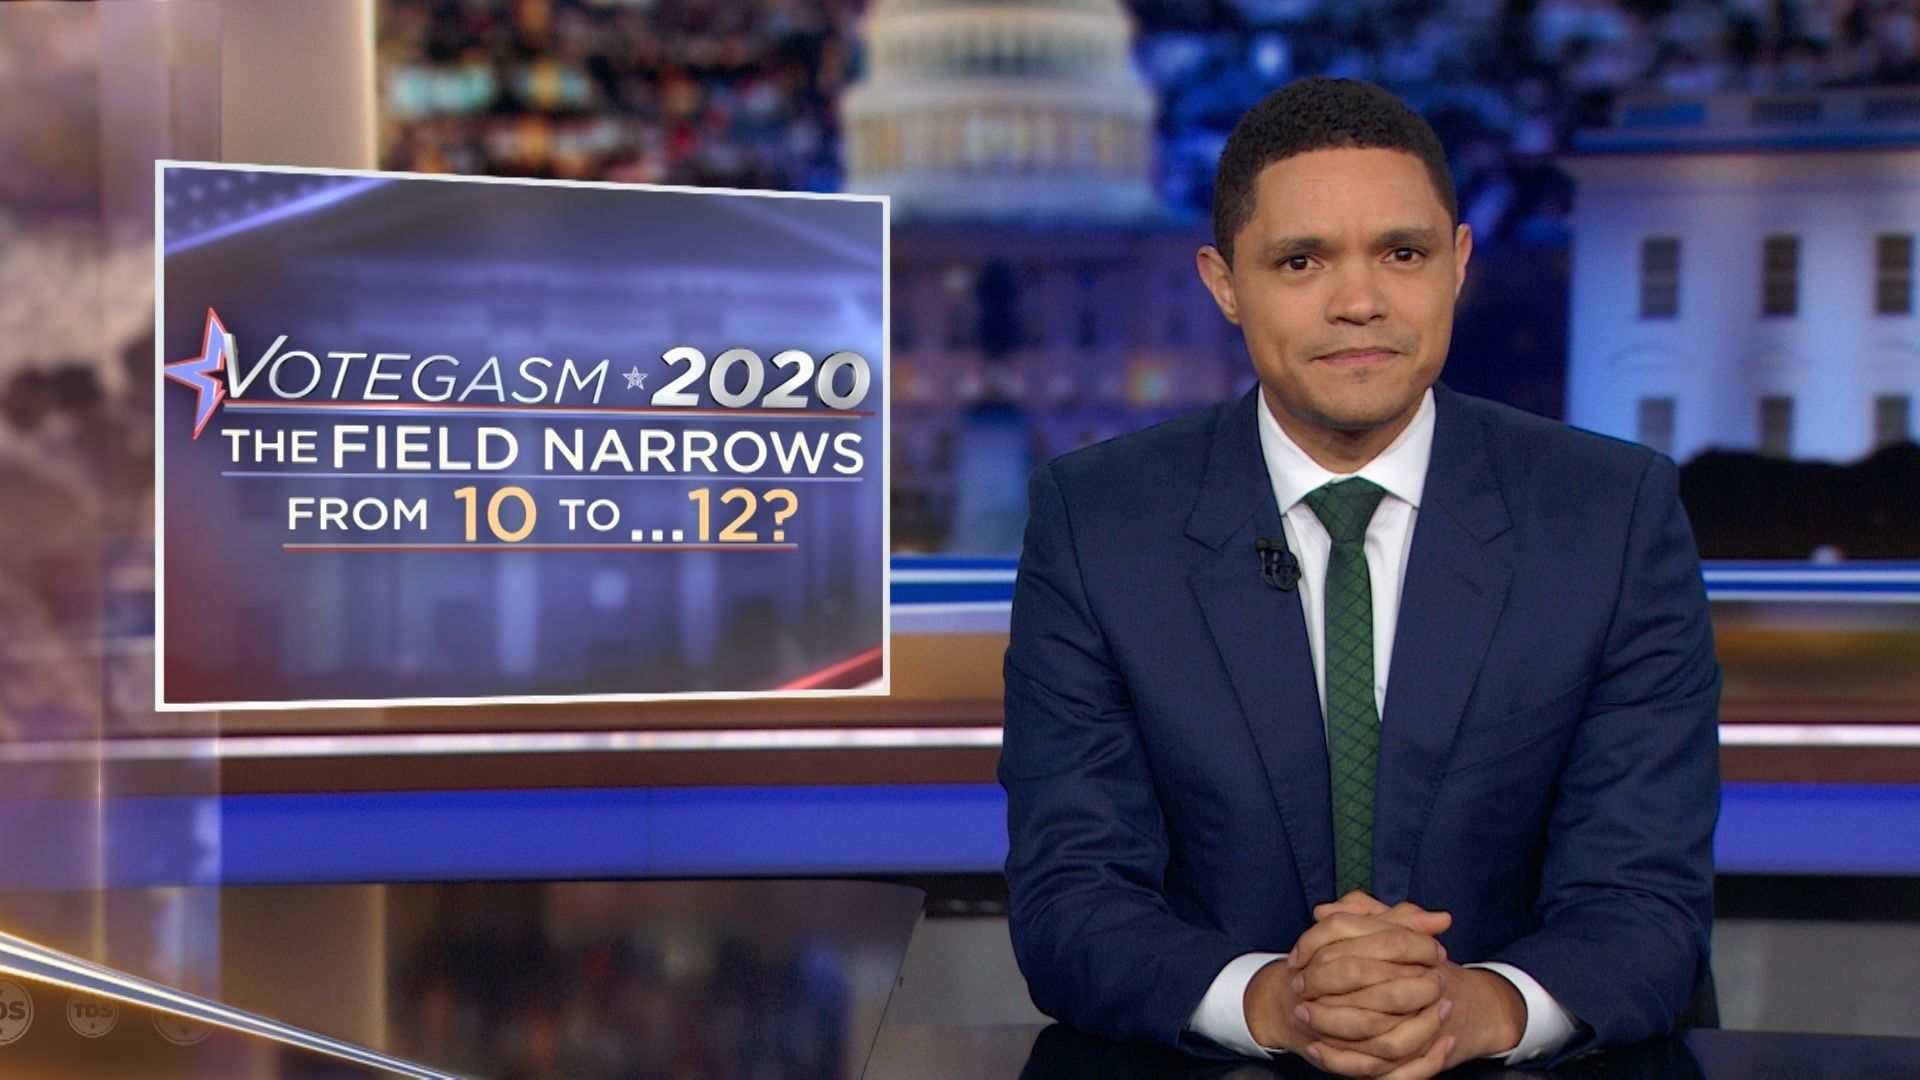 The Daily Show background